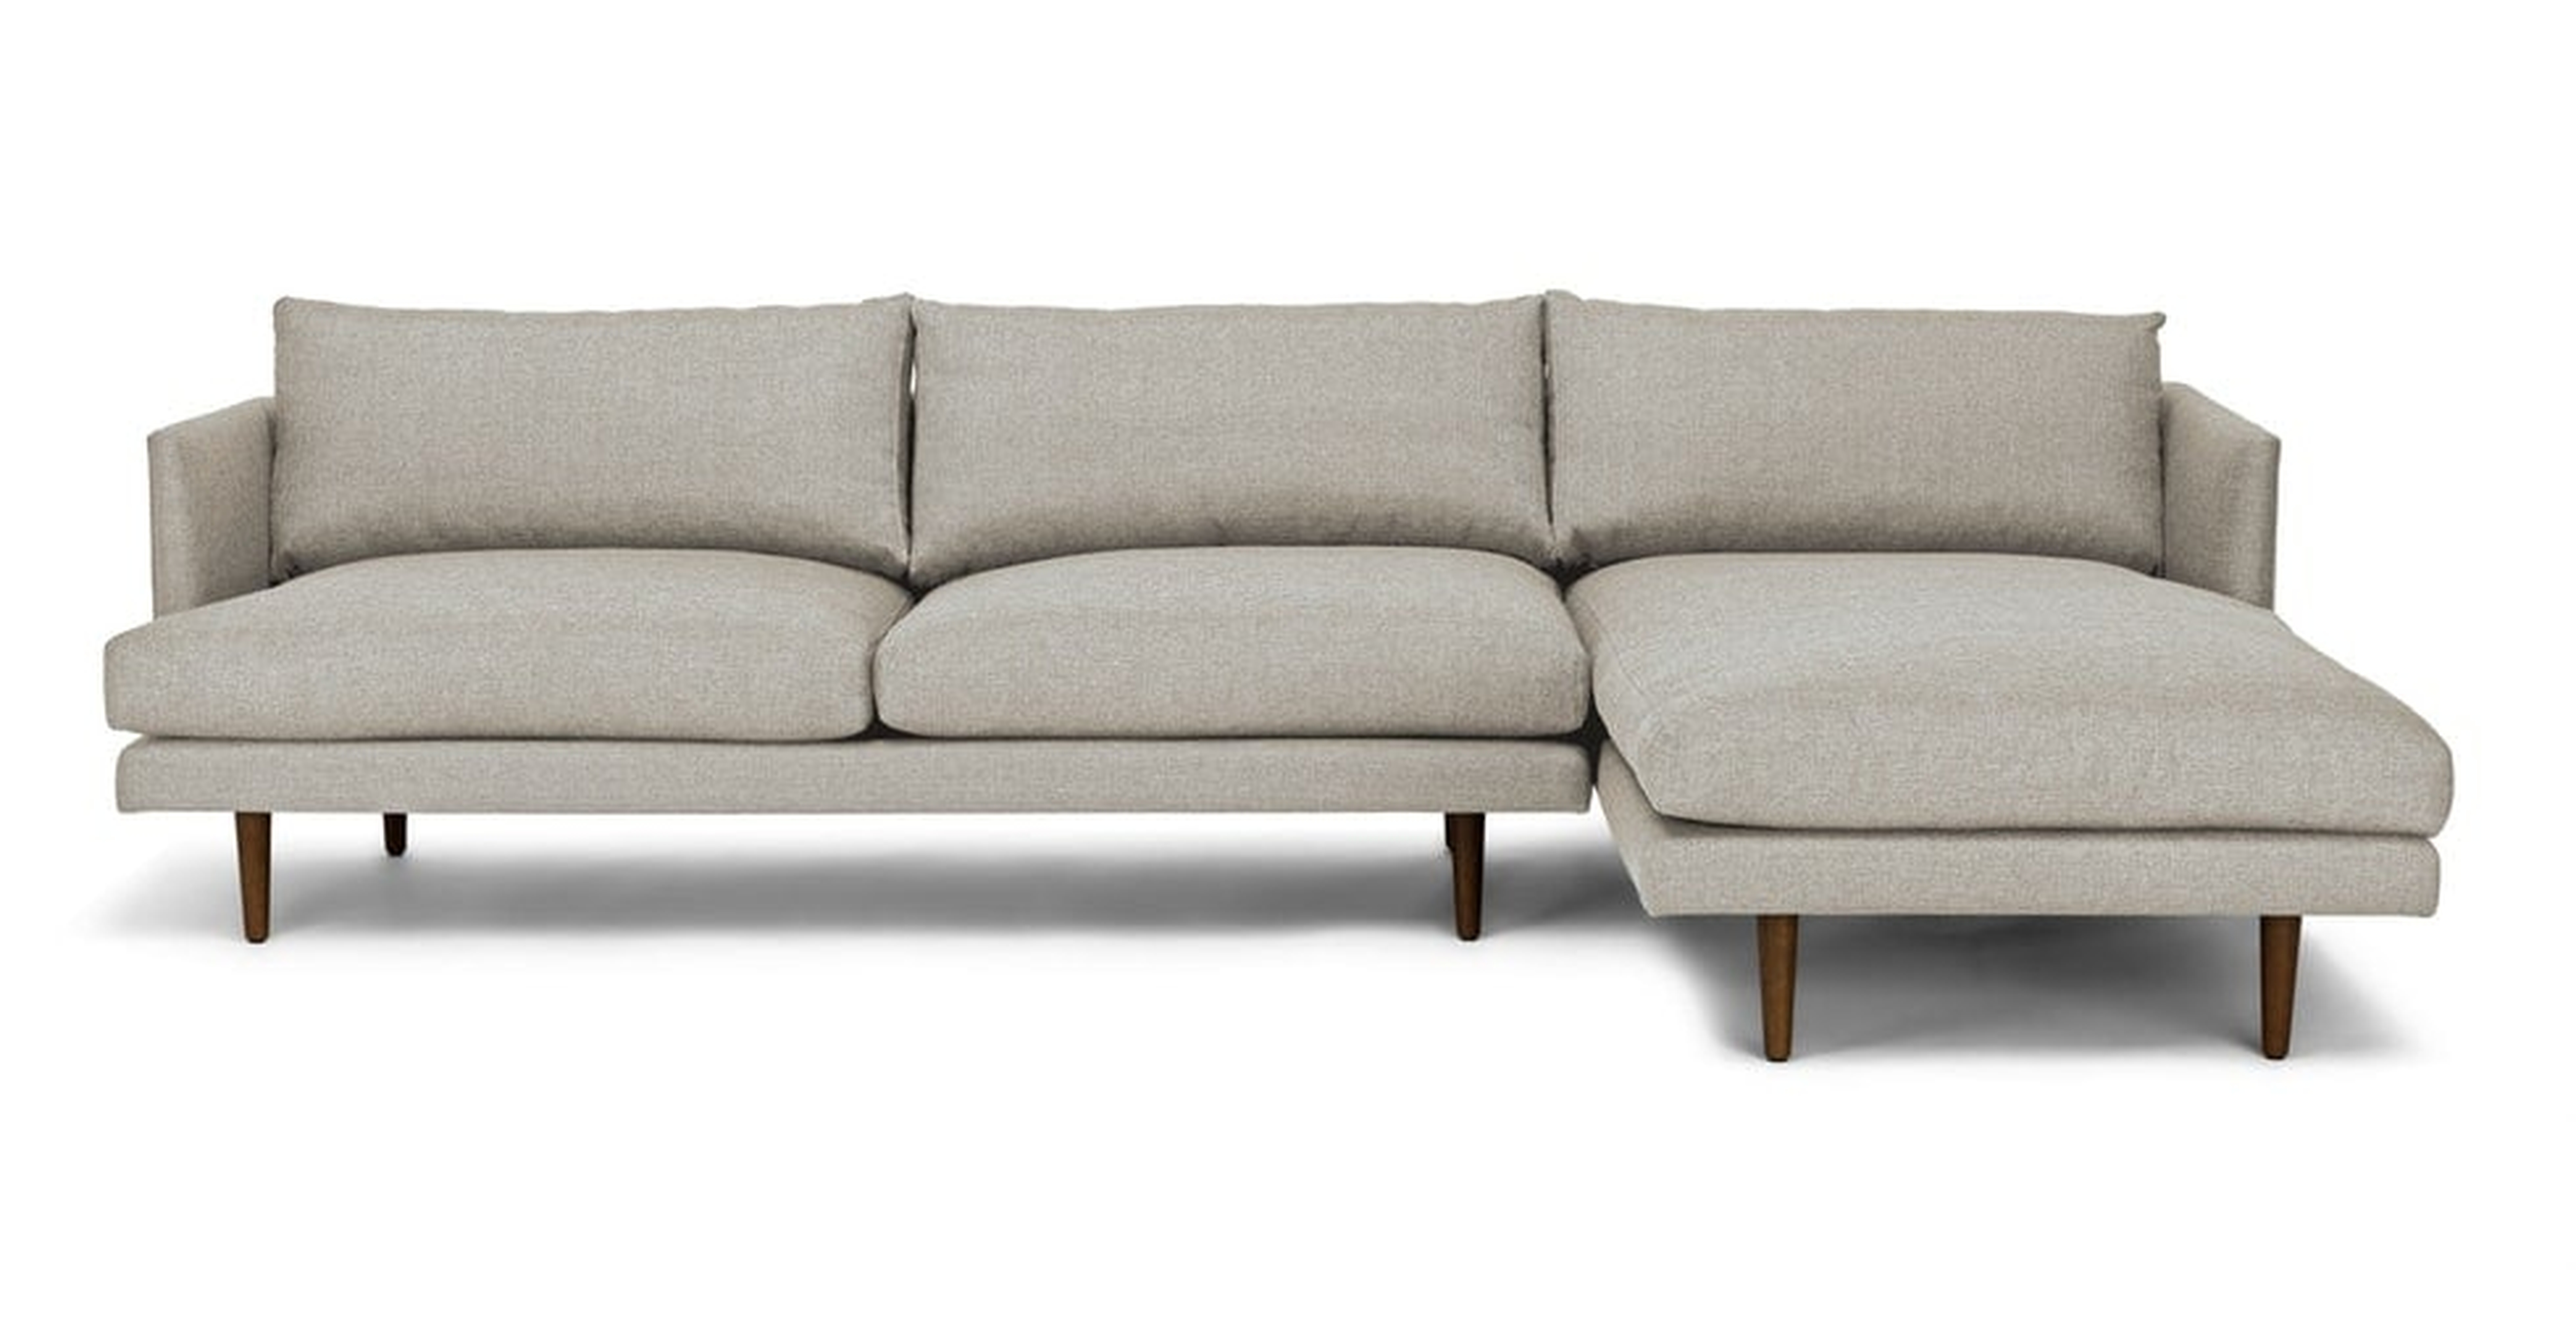 Burrard Seasalt Gray Right Sectional - Article